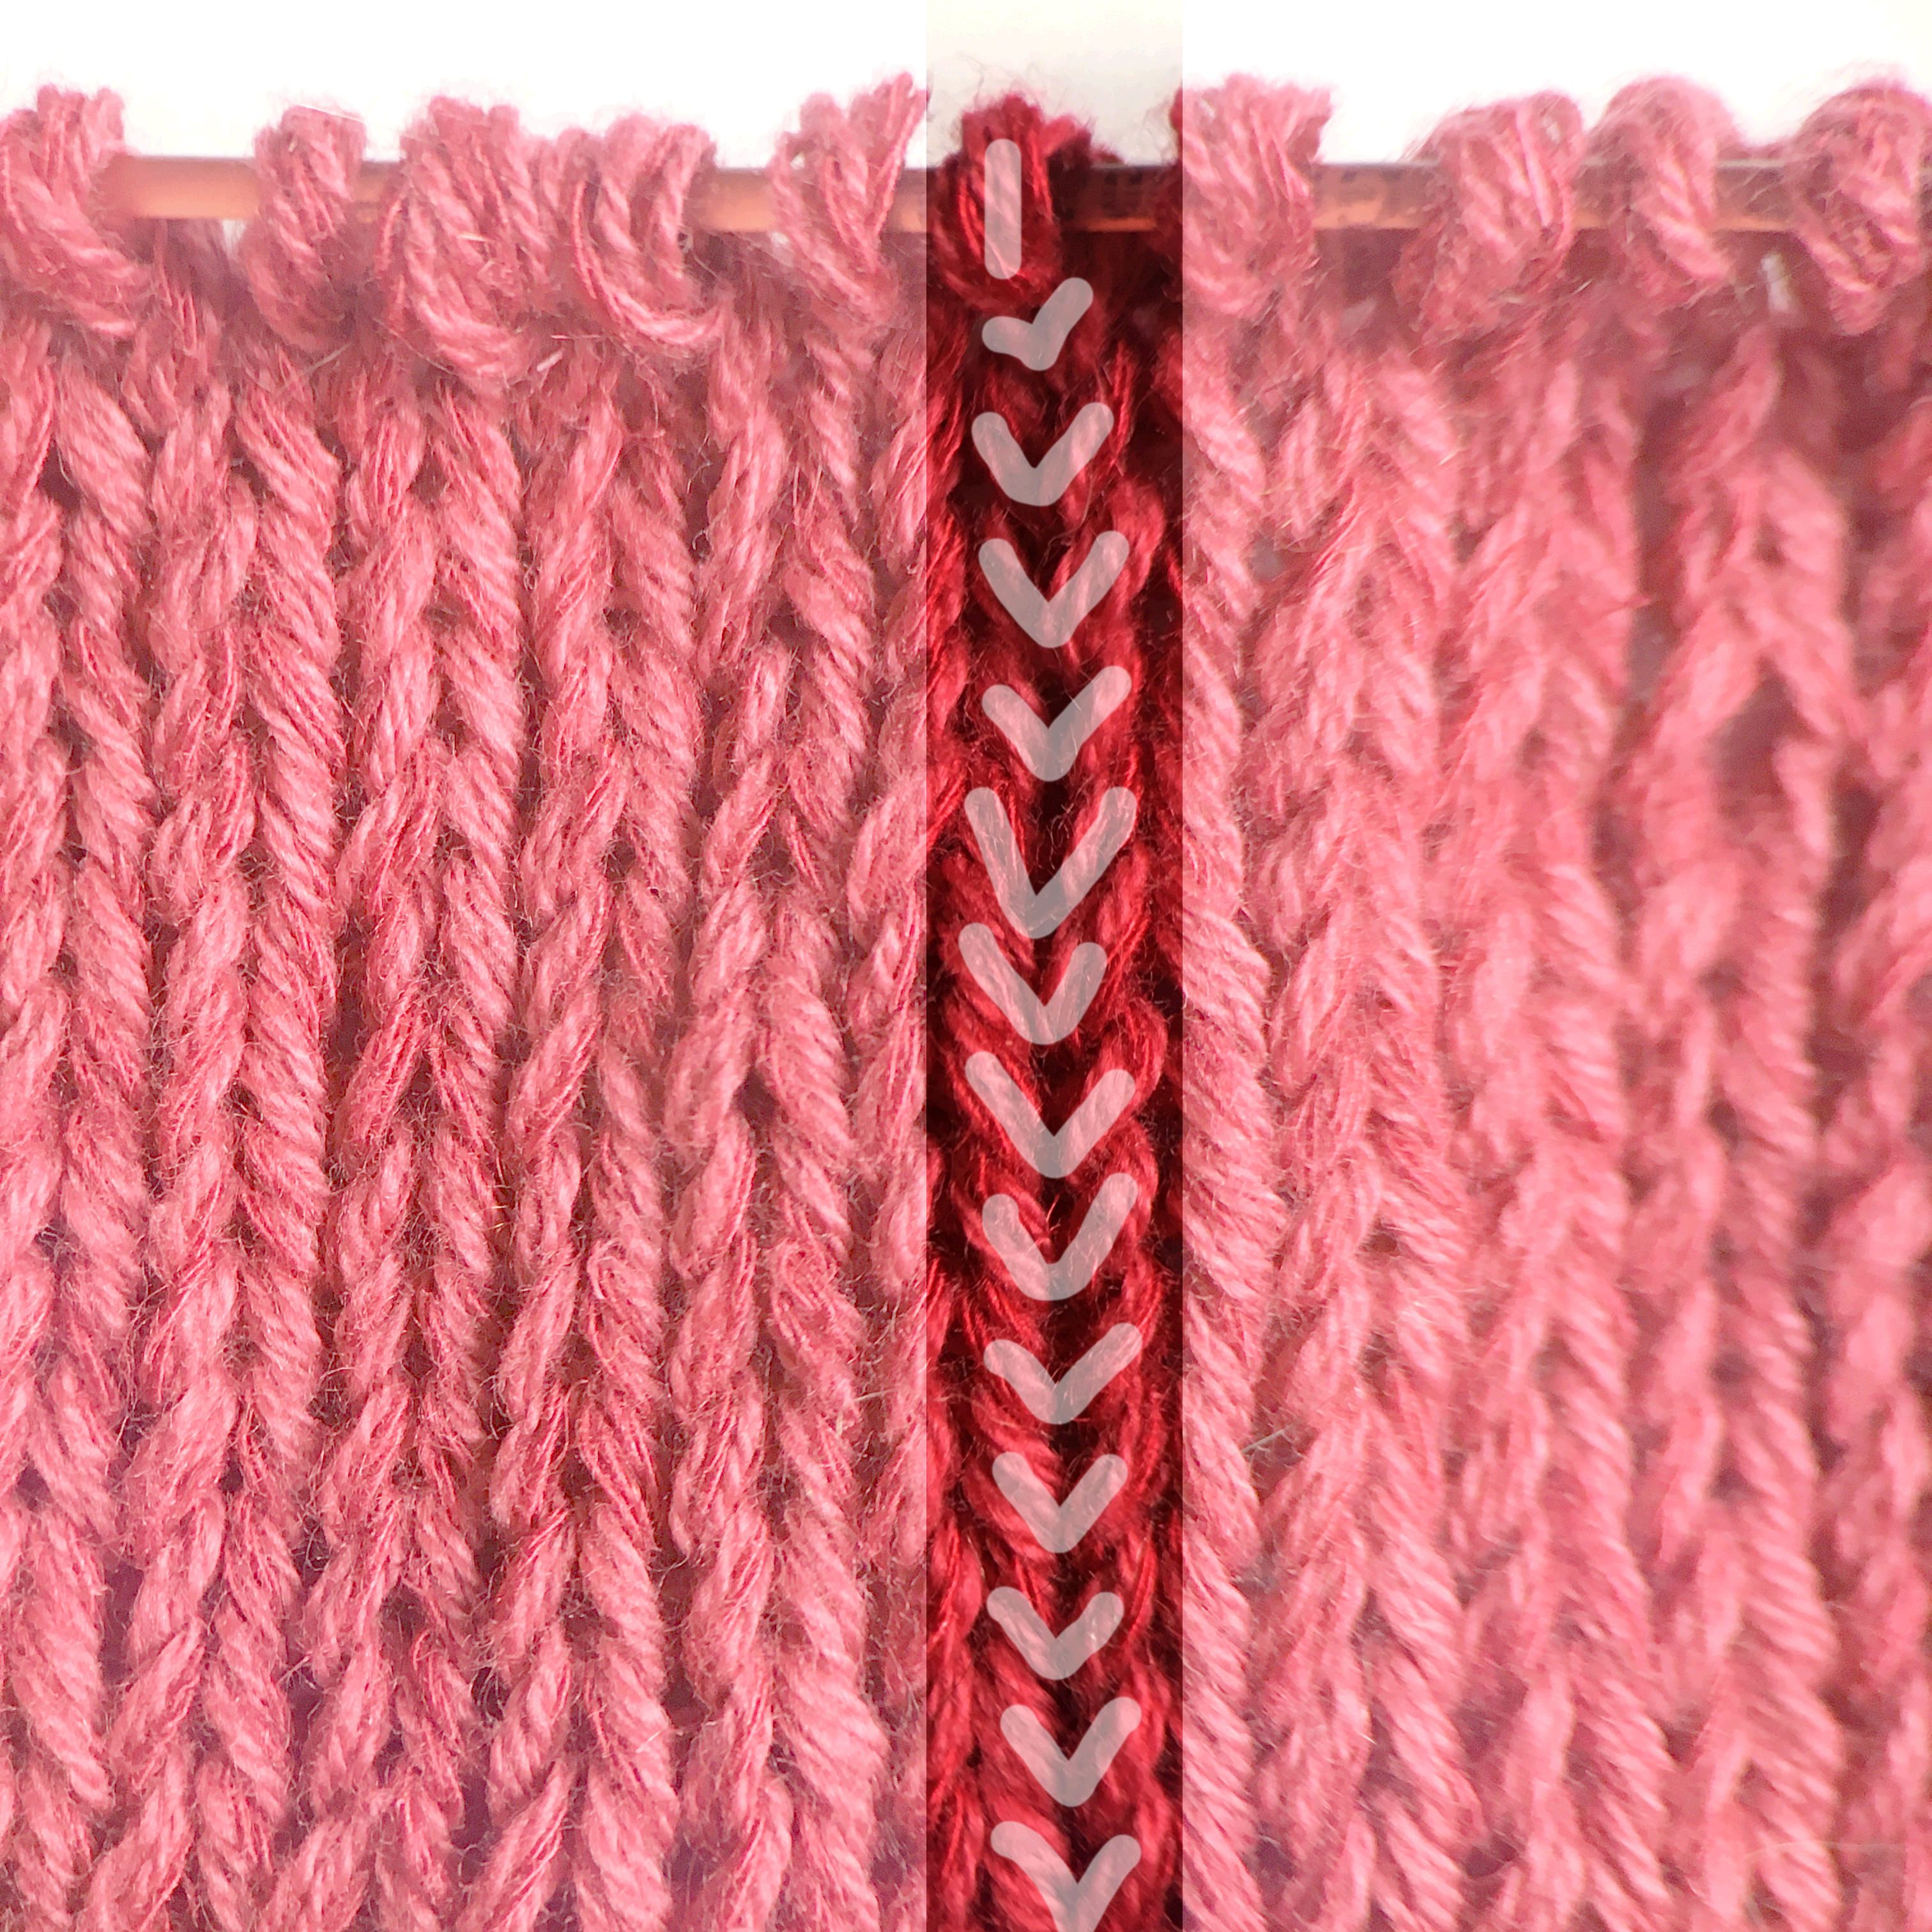 How to count knit rows